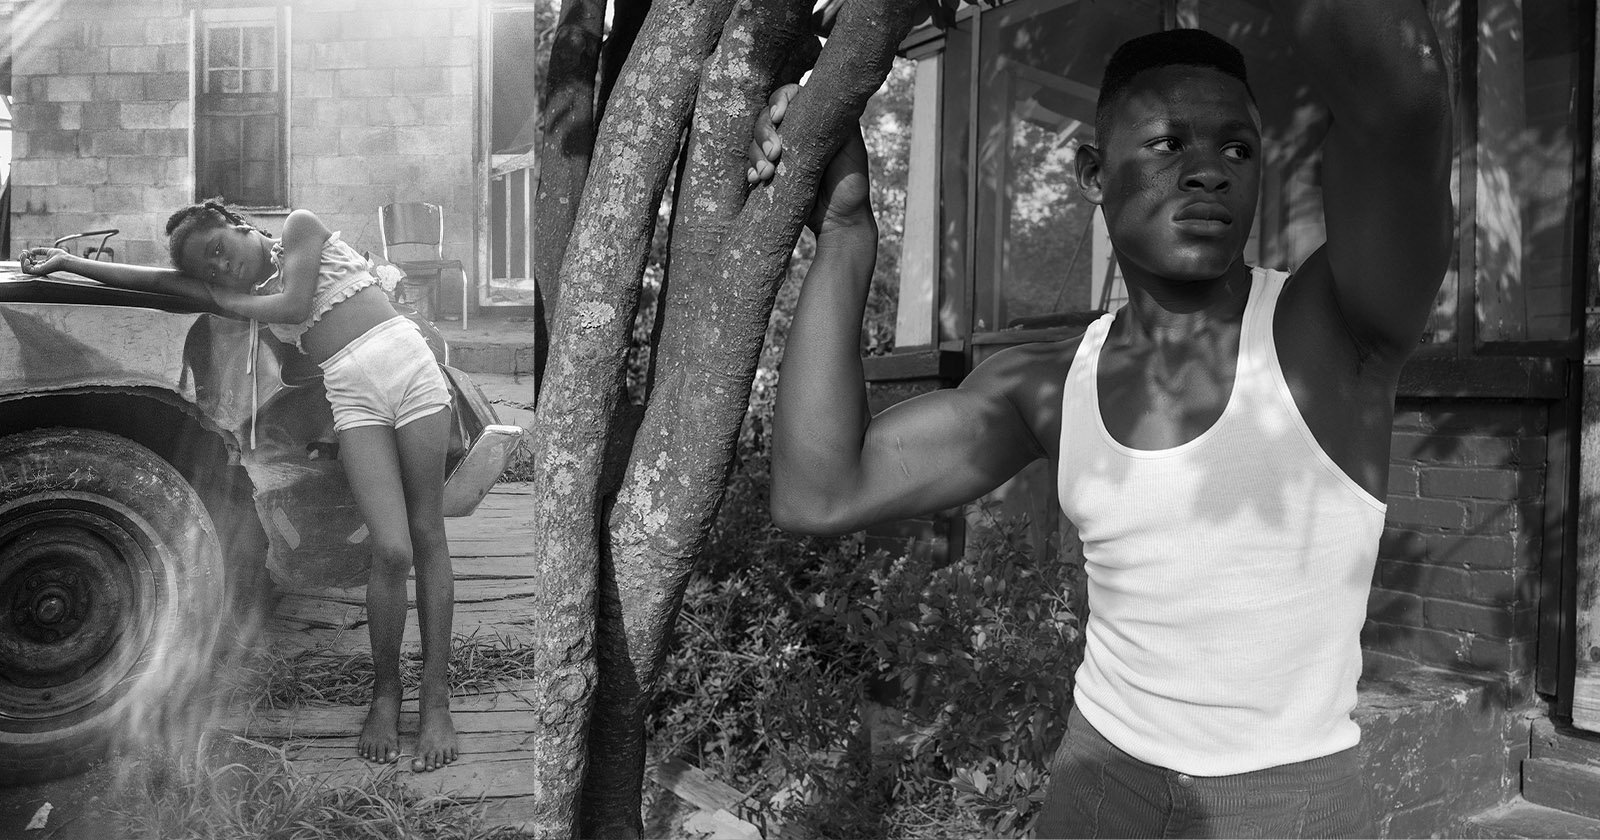 Large Format Photos Document Black Communities in the 1980s Deep South